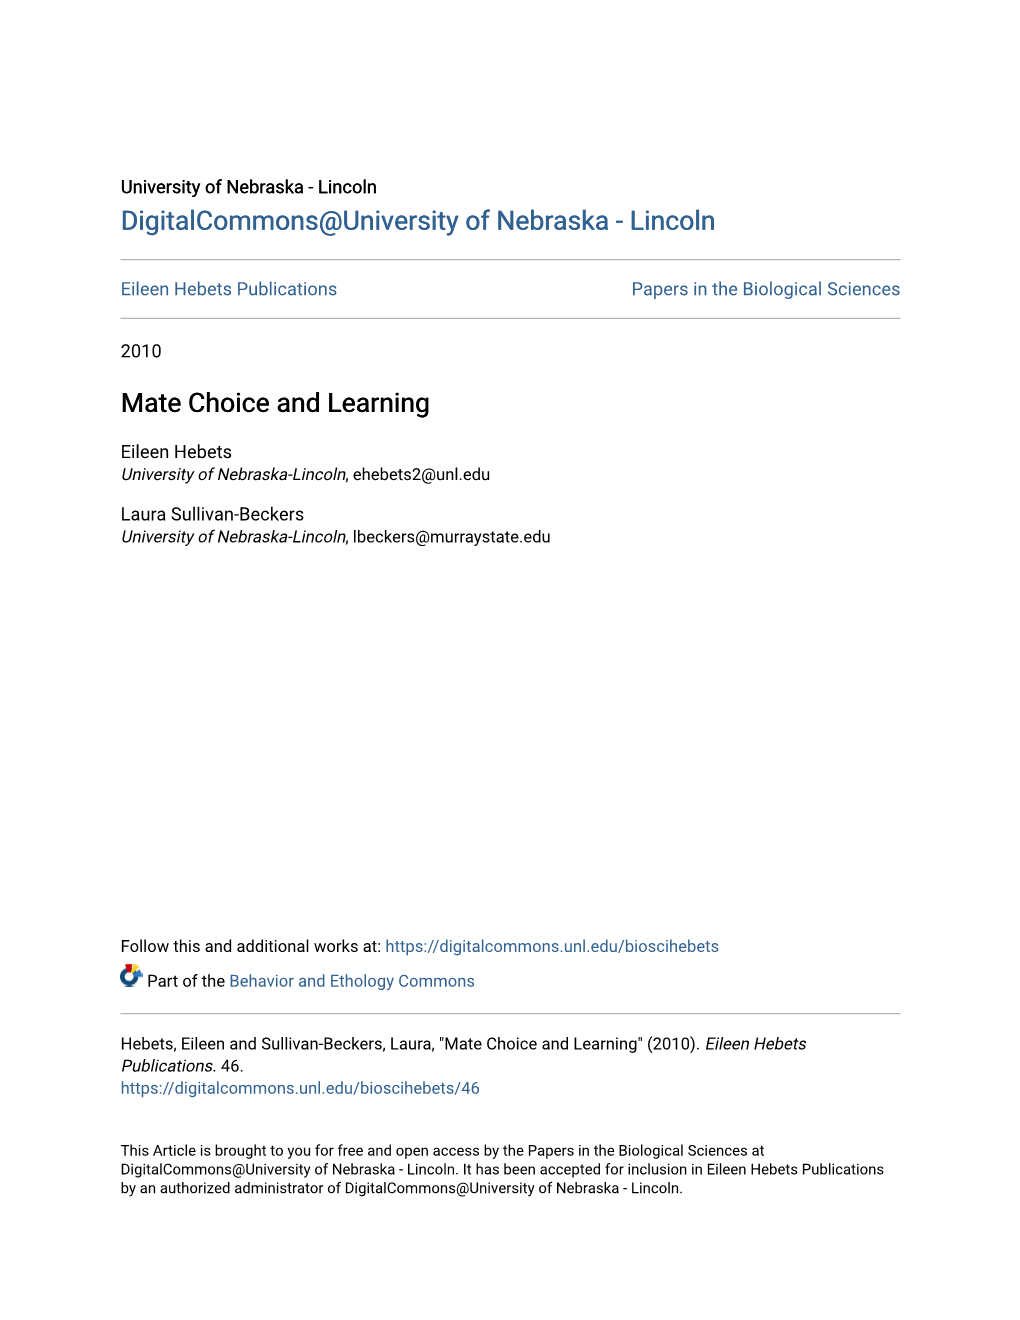 Mate Choice and Learning